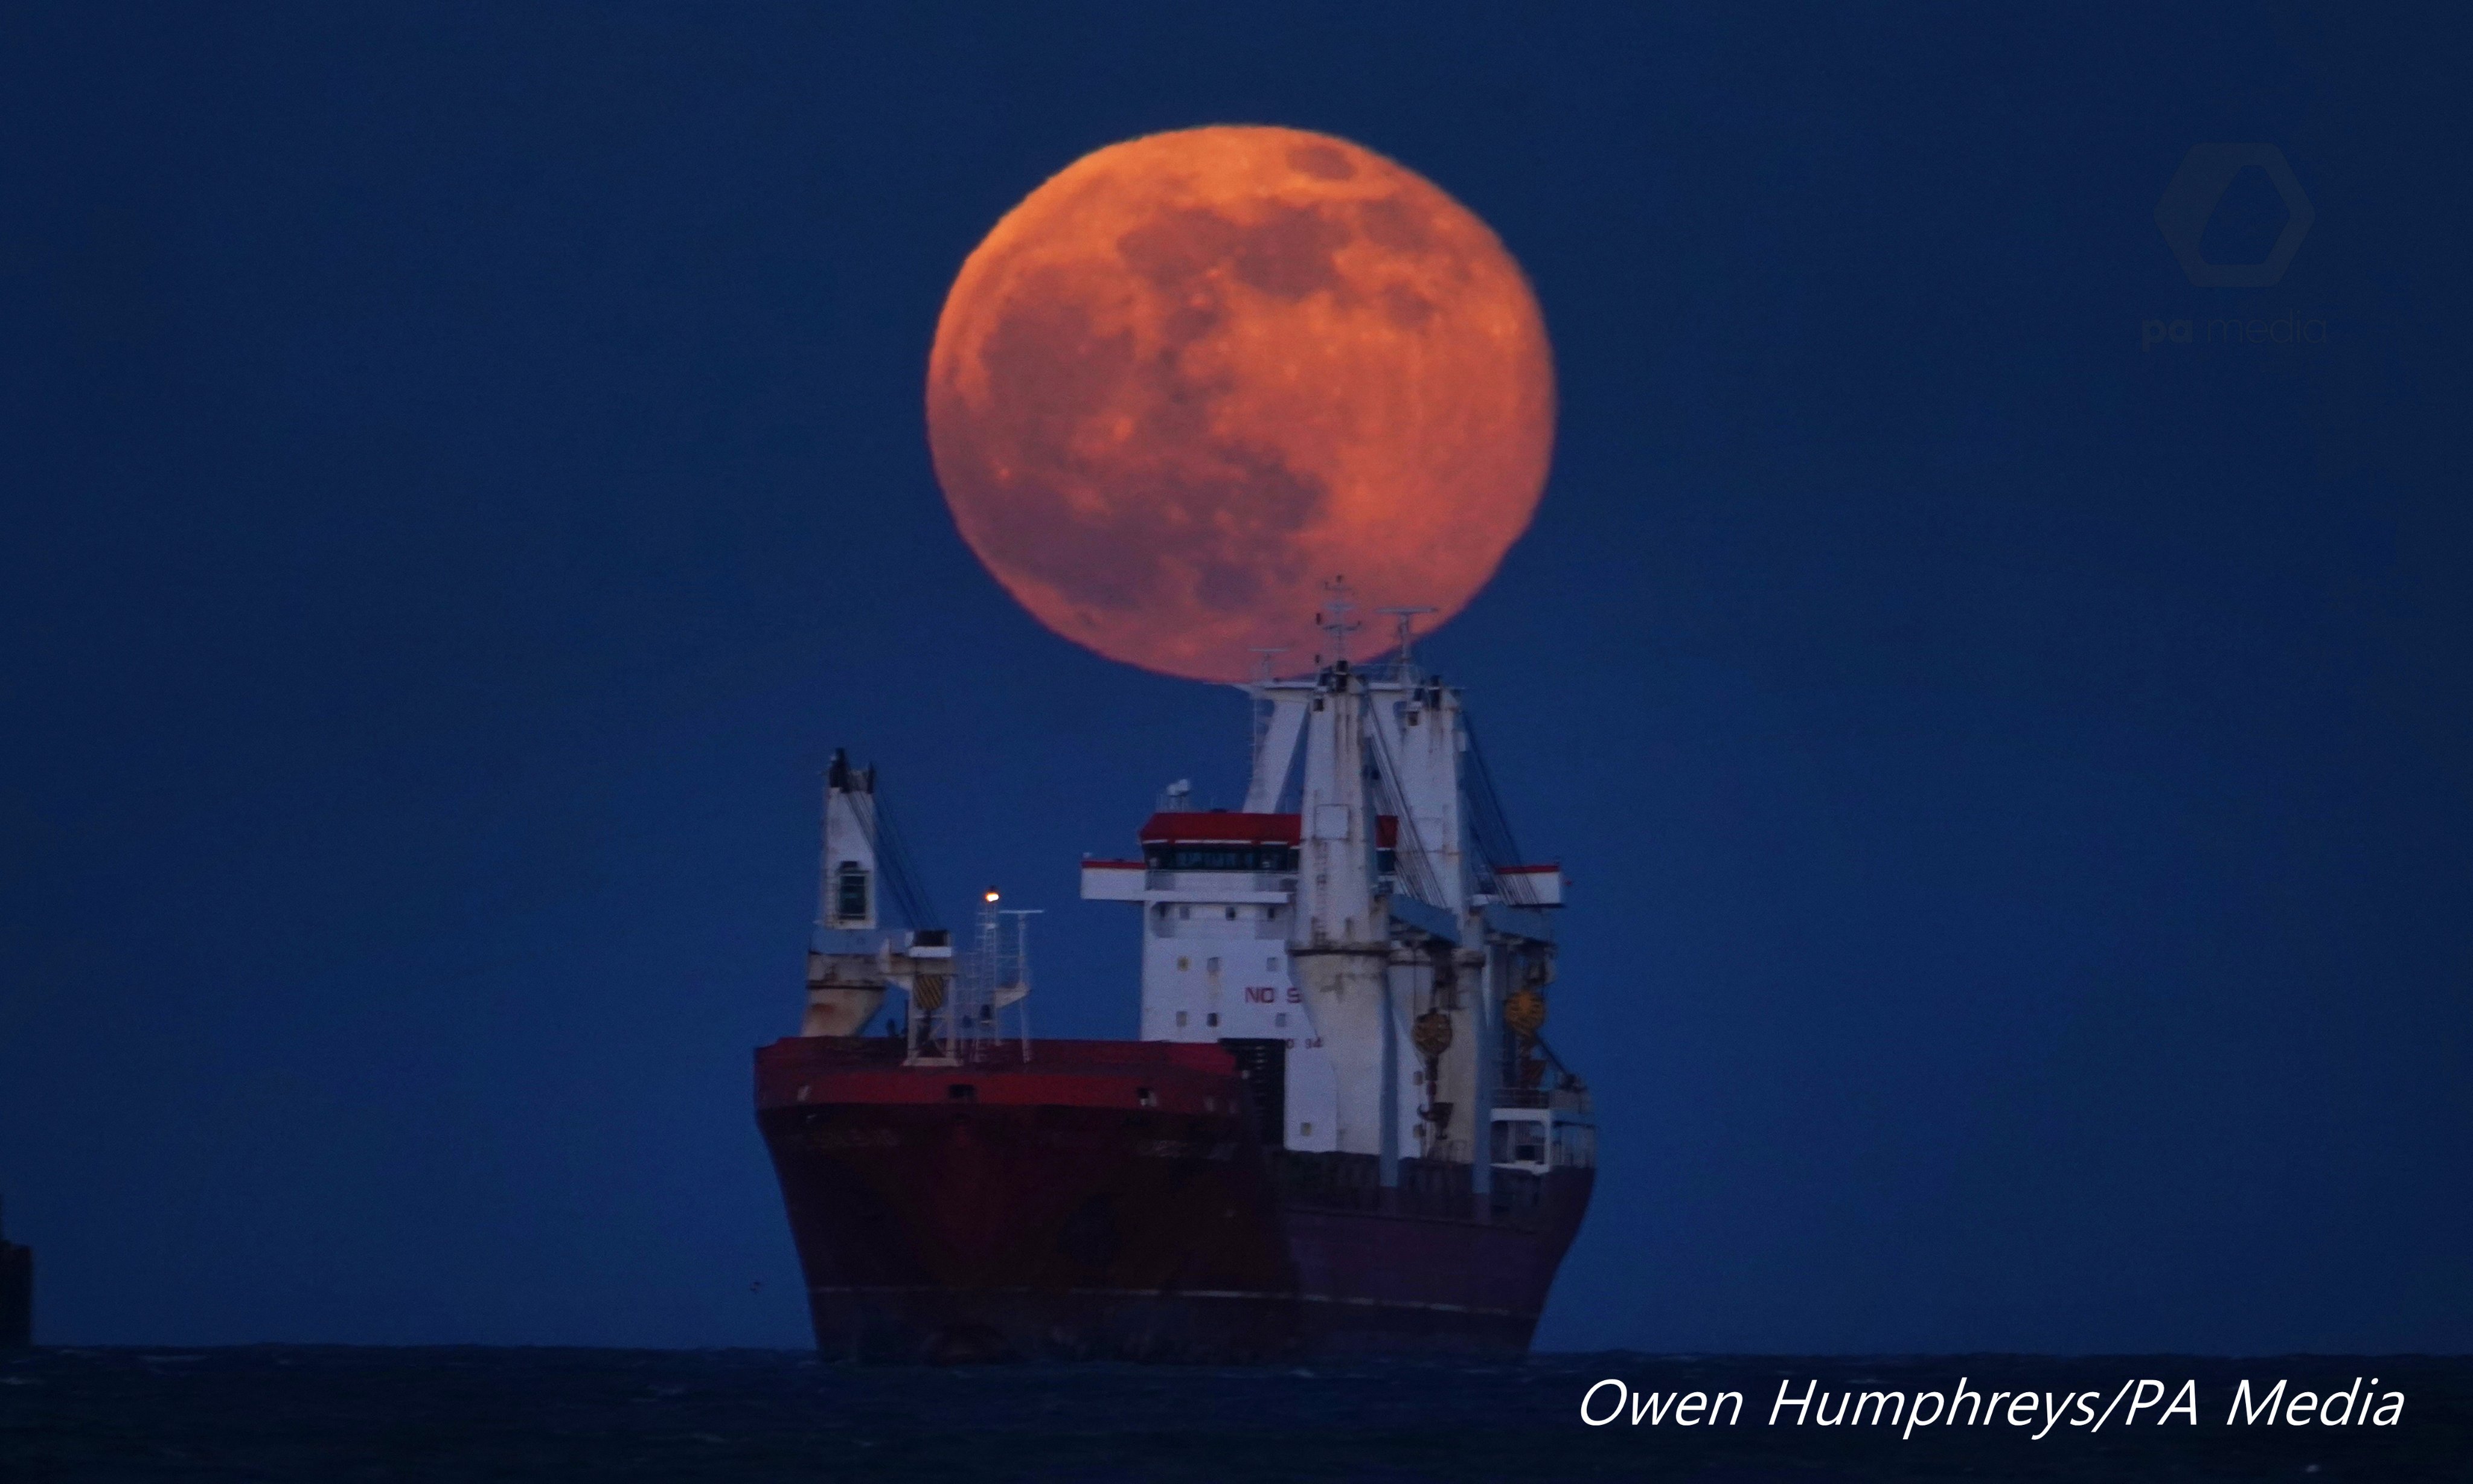 Snow Moon as it rises over a Cargo ship on the North Sea off the coast of Tynemouth UK by Owen Humphreys @owenhumphreys1